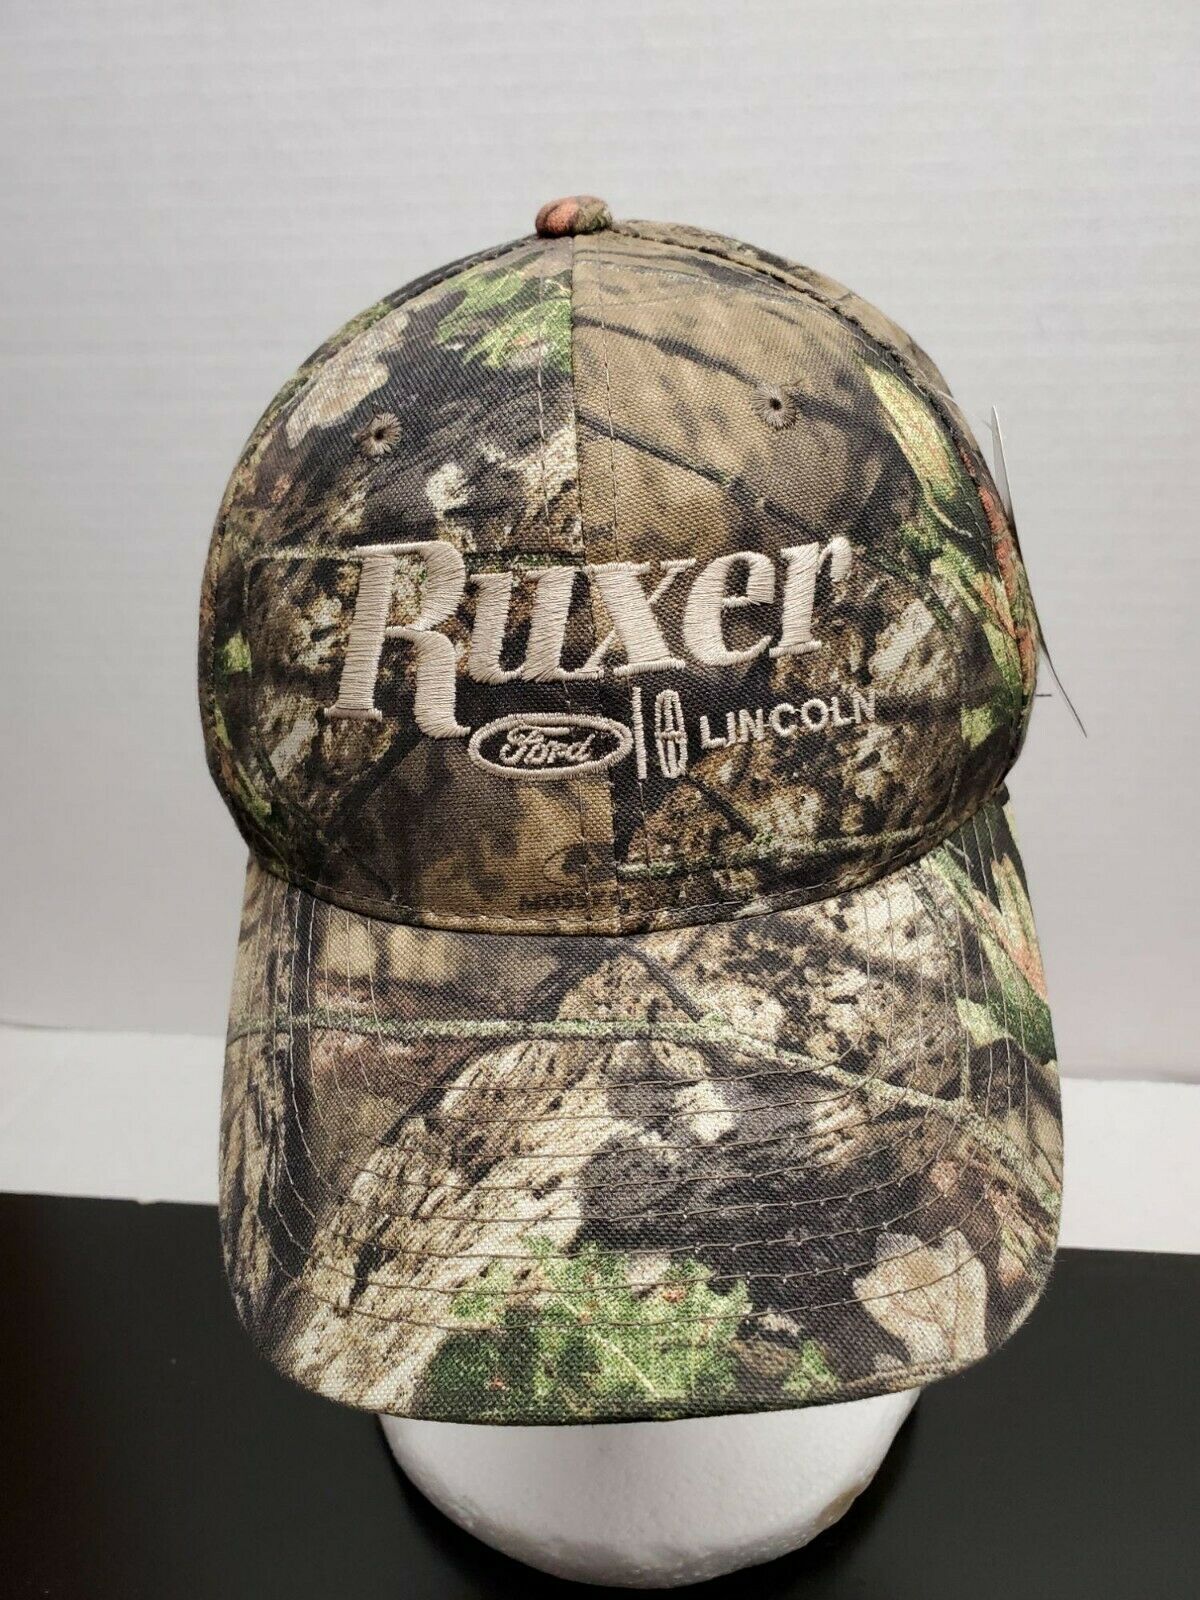 Primary image for Port Authority Ruxer Ford Lincoln Camouflage Hat - New with Tags